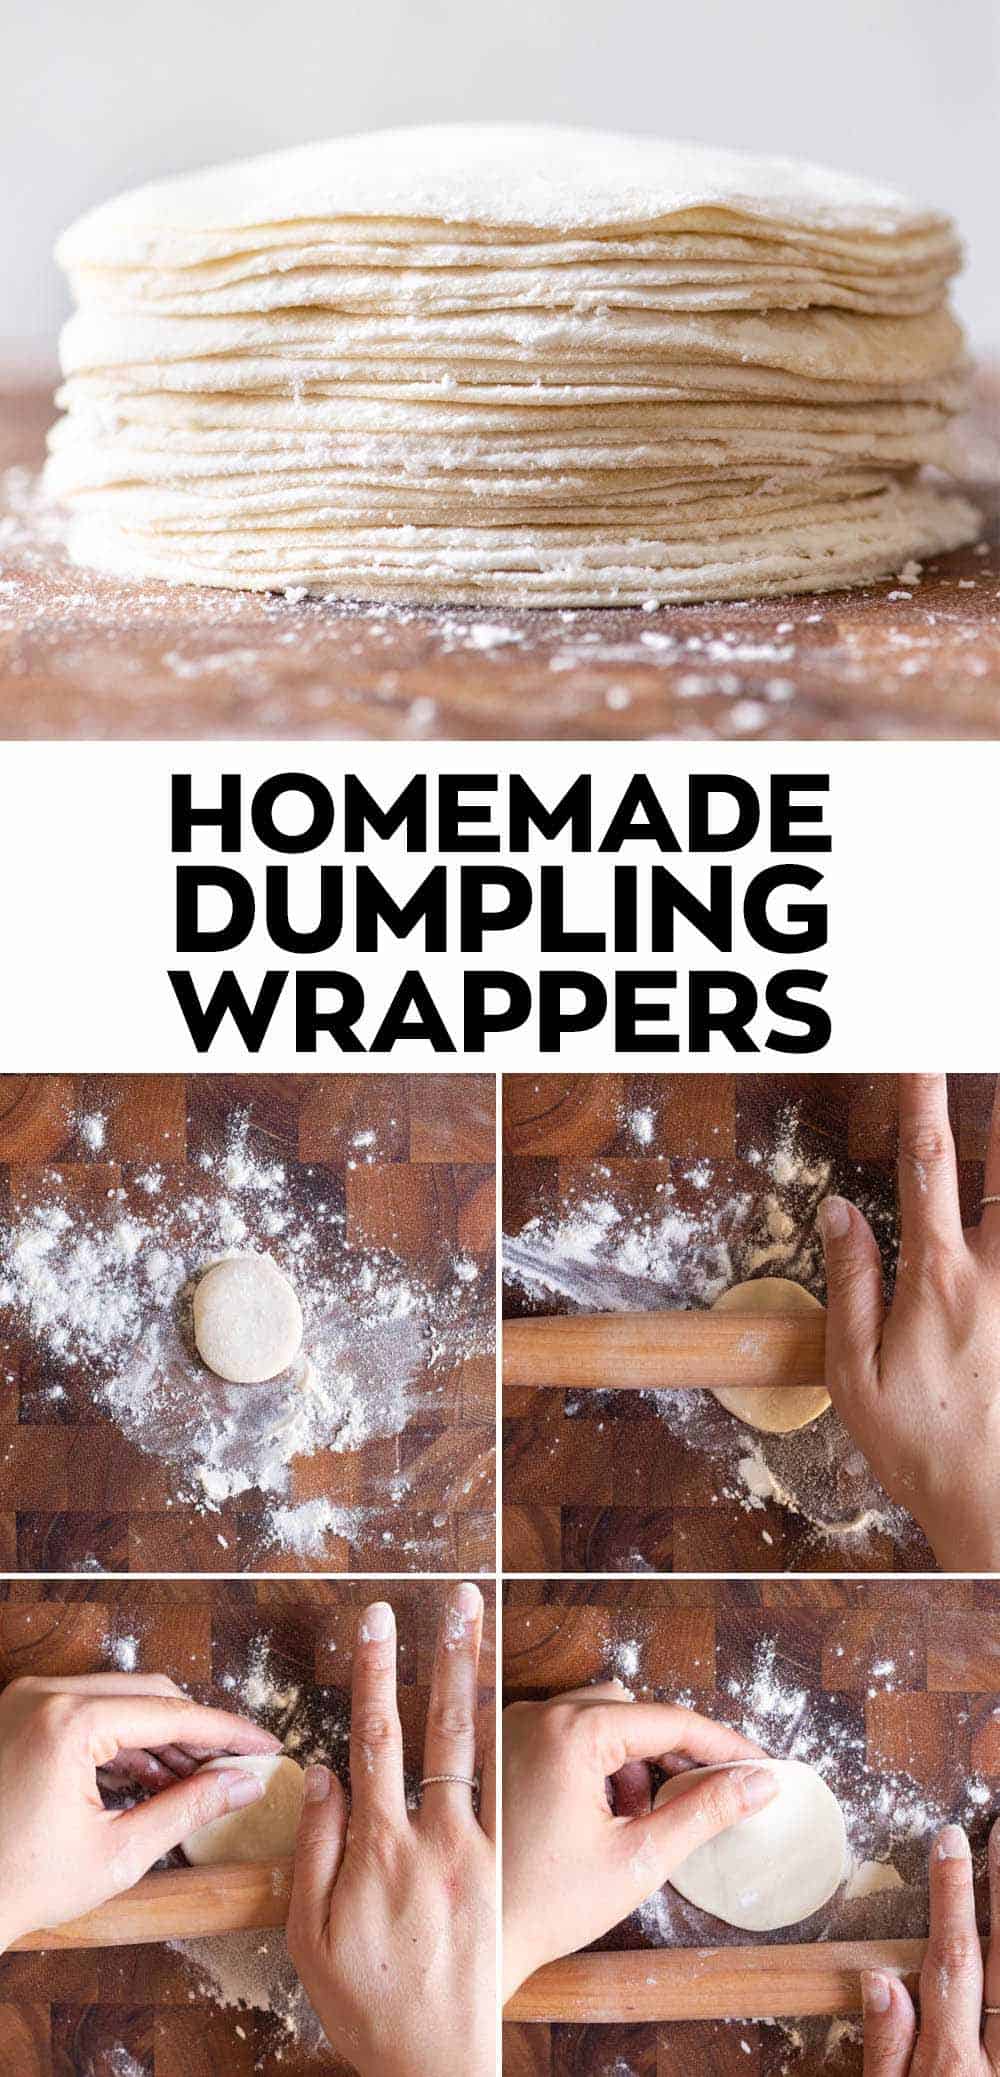 How to Make Dumpling Wrappers - Step-by-step guide